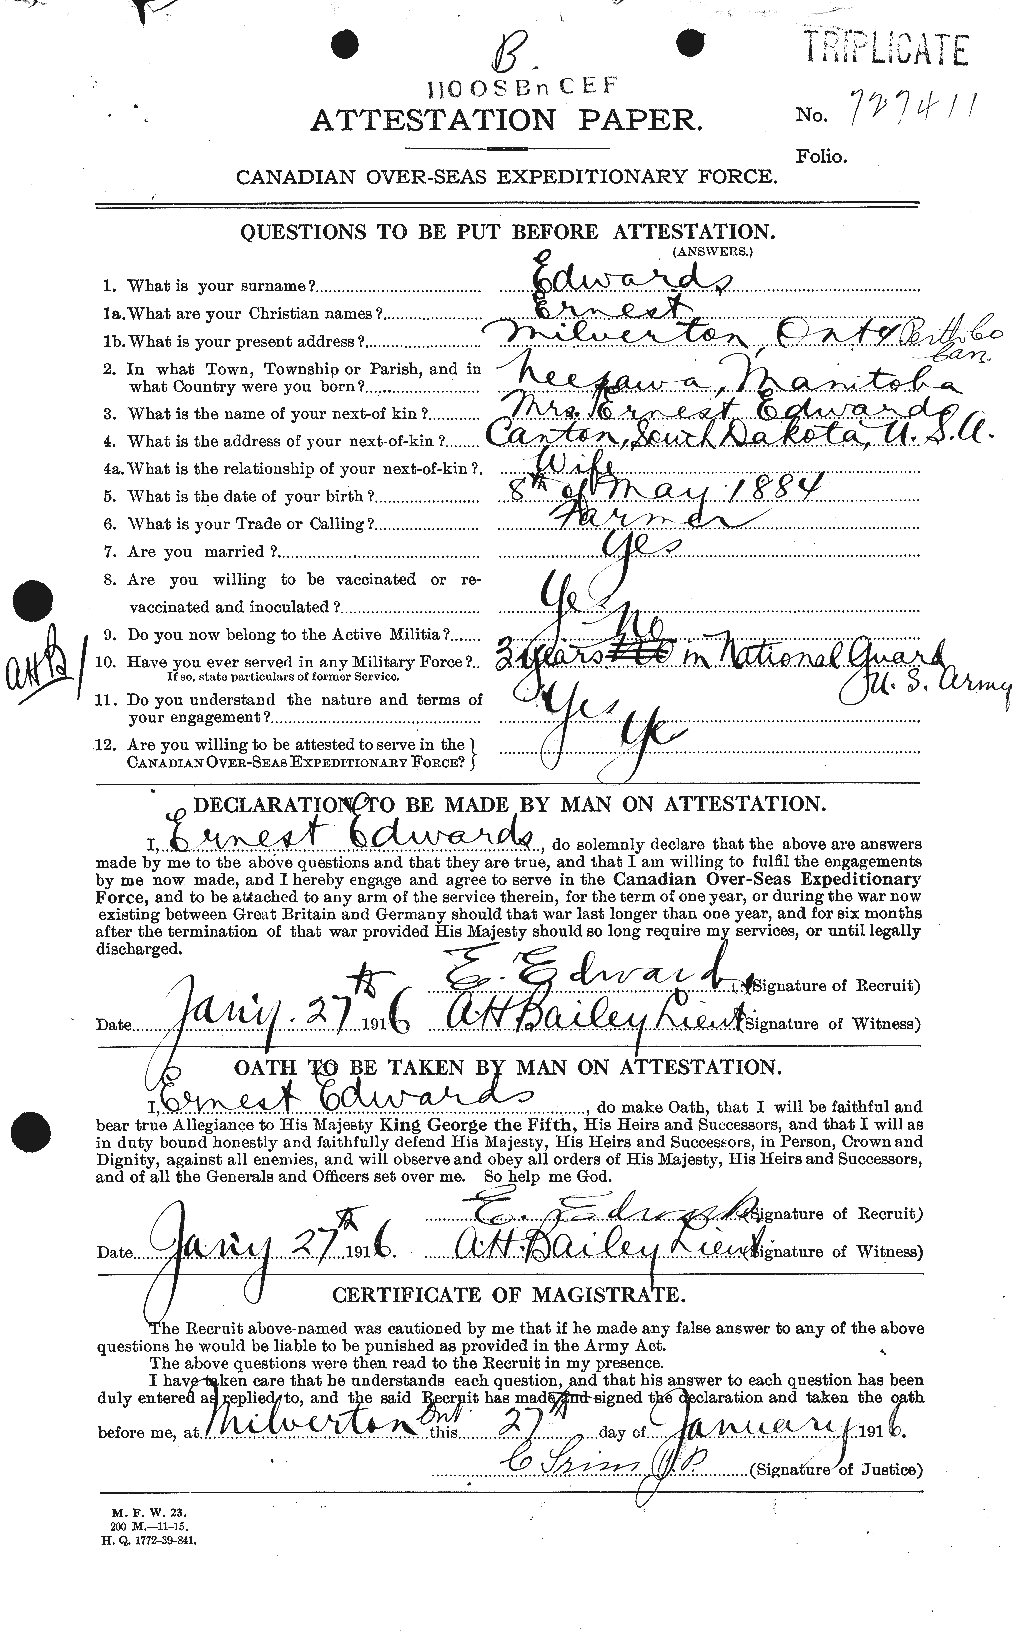 Personnel Records of the First World War - CEF 309000a